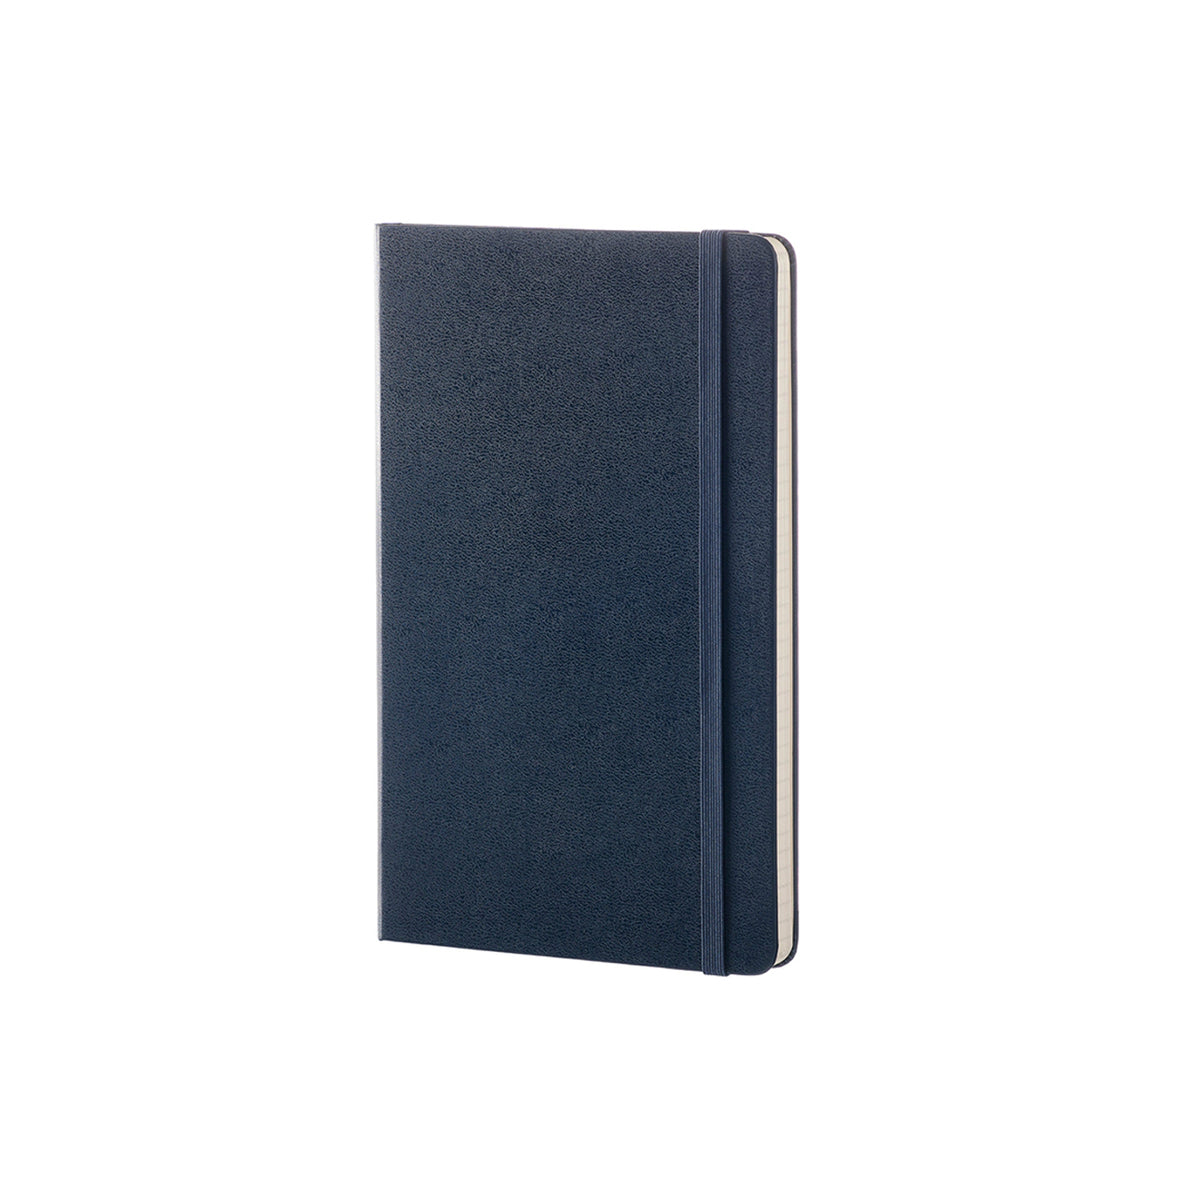 Moleskine - Classic Hard Cover Notebook - Ruled - Large - Sapphire Blue